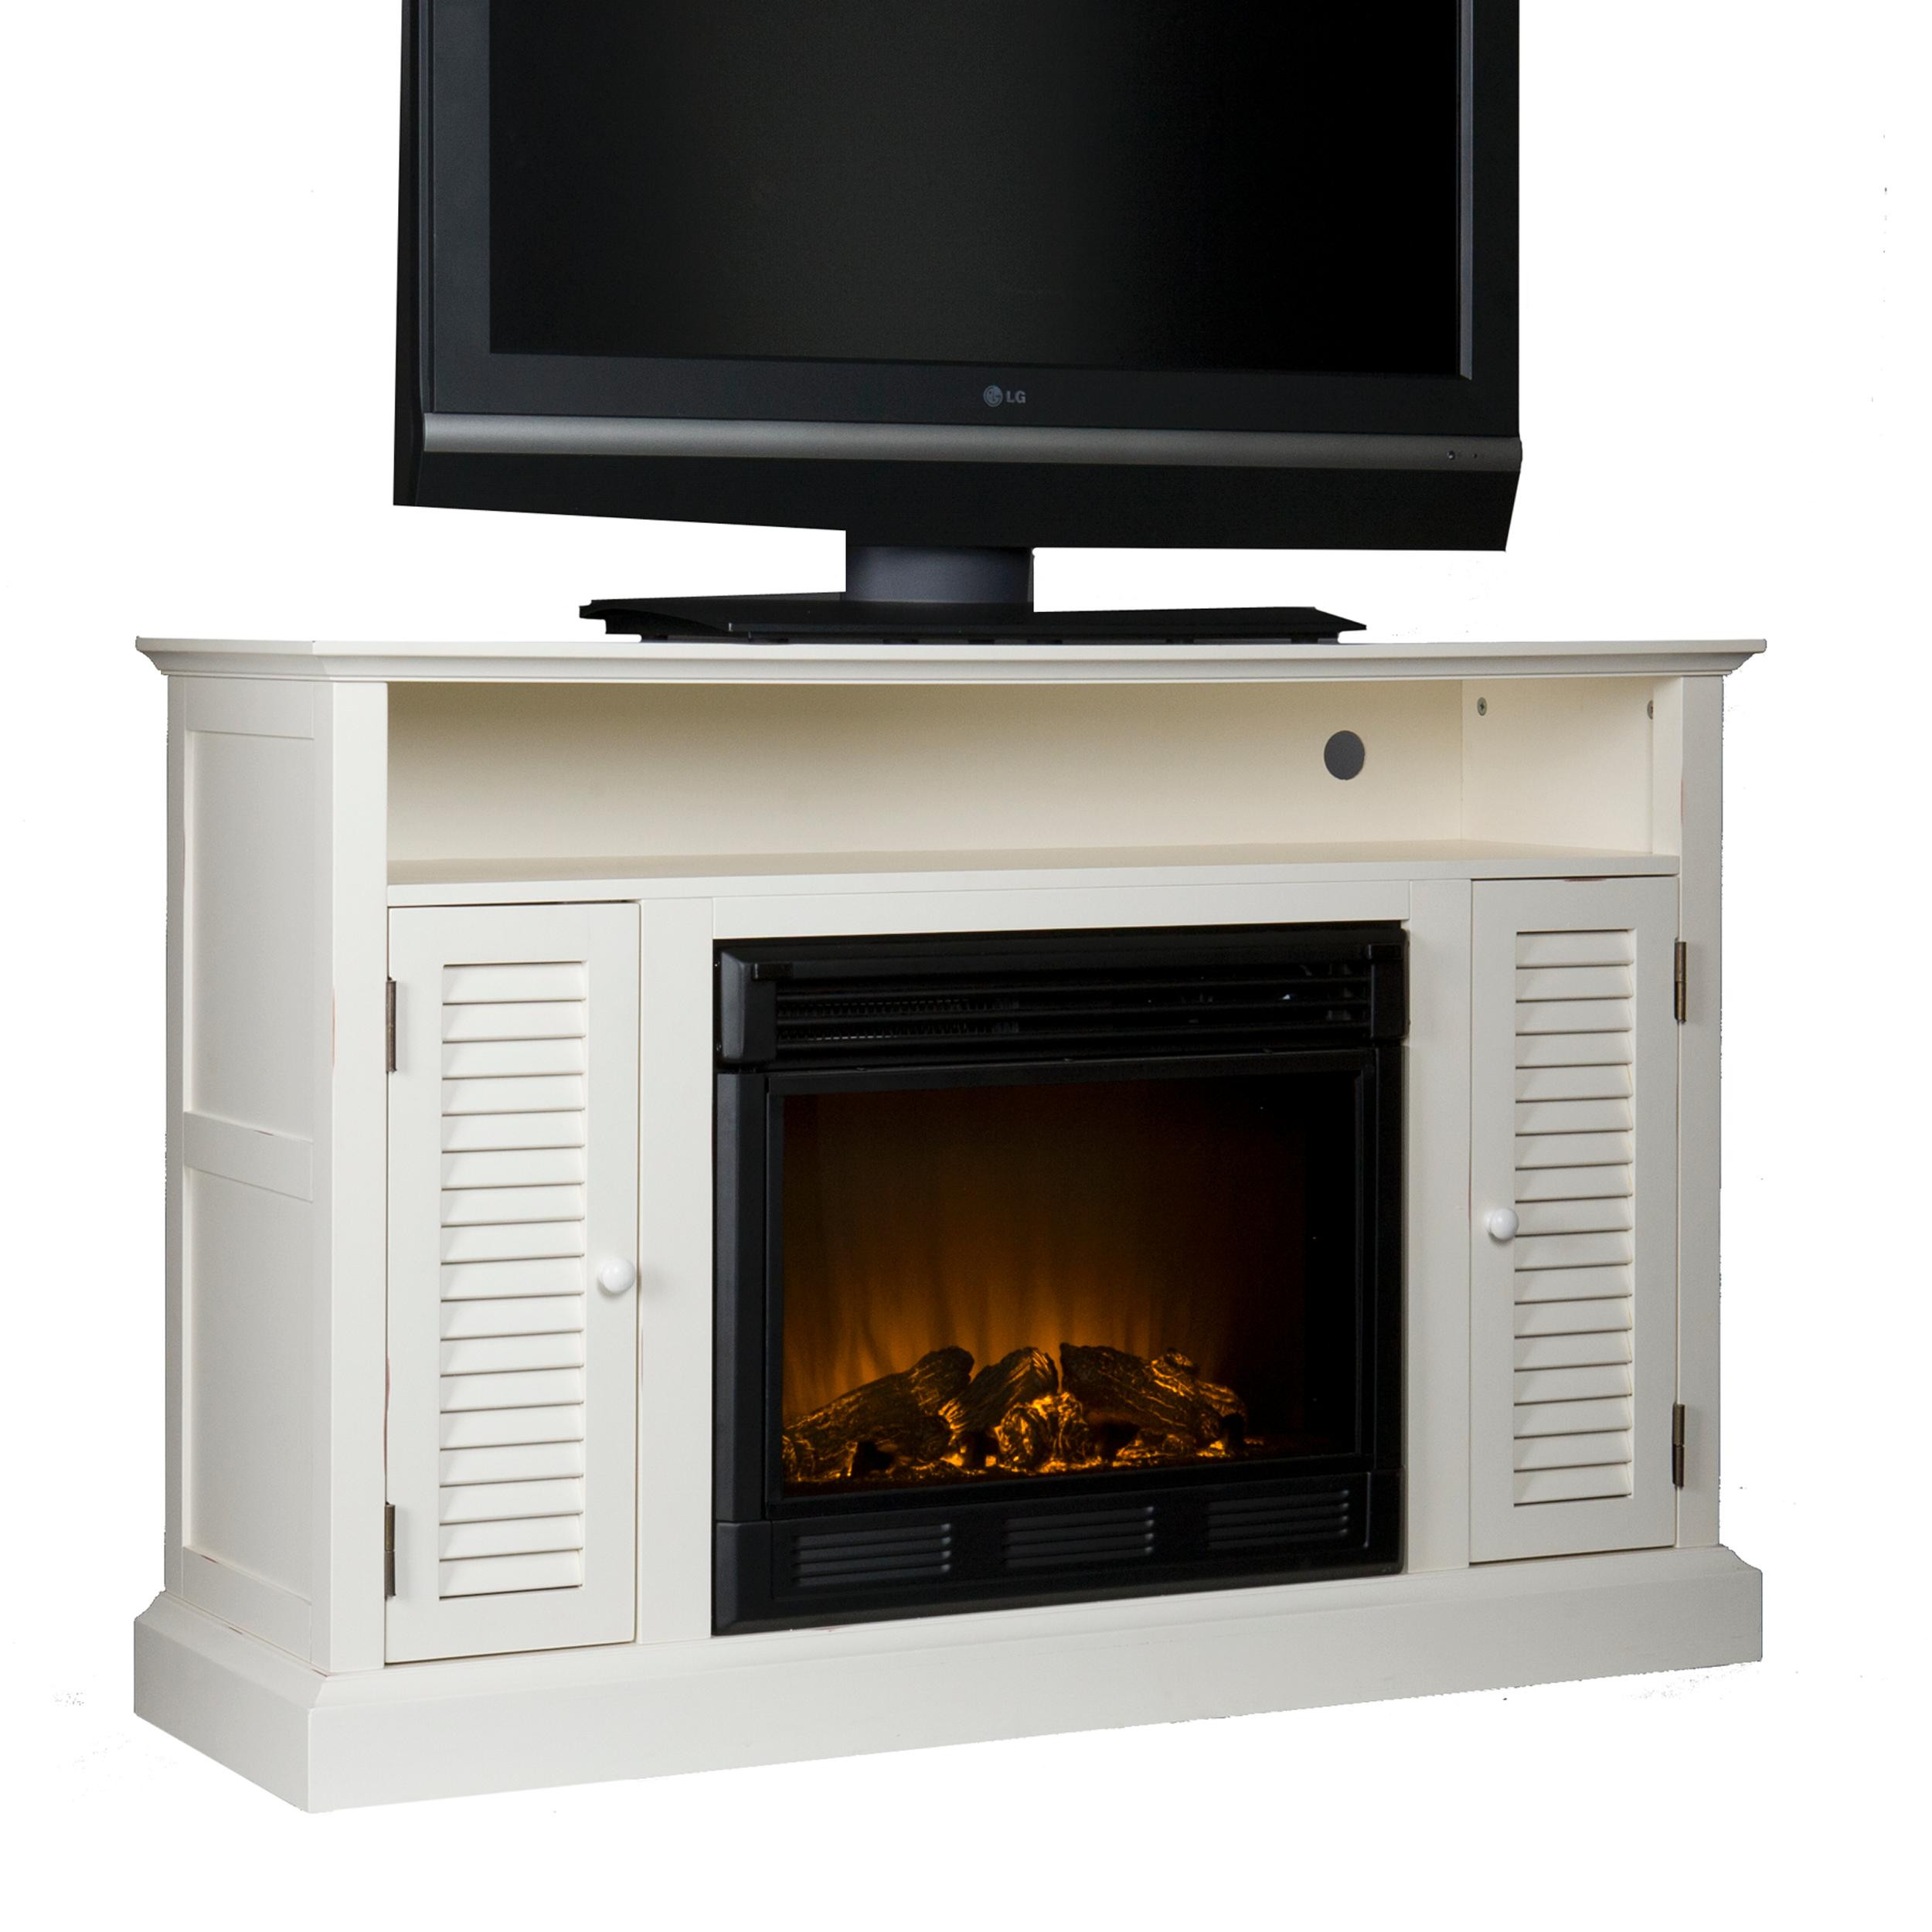 Electric Fireplace Media Cabinets
 Amazon SEI Antebellum Media Console with Electric